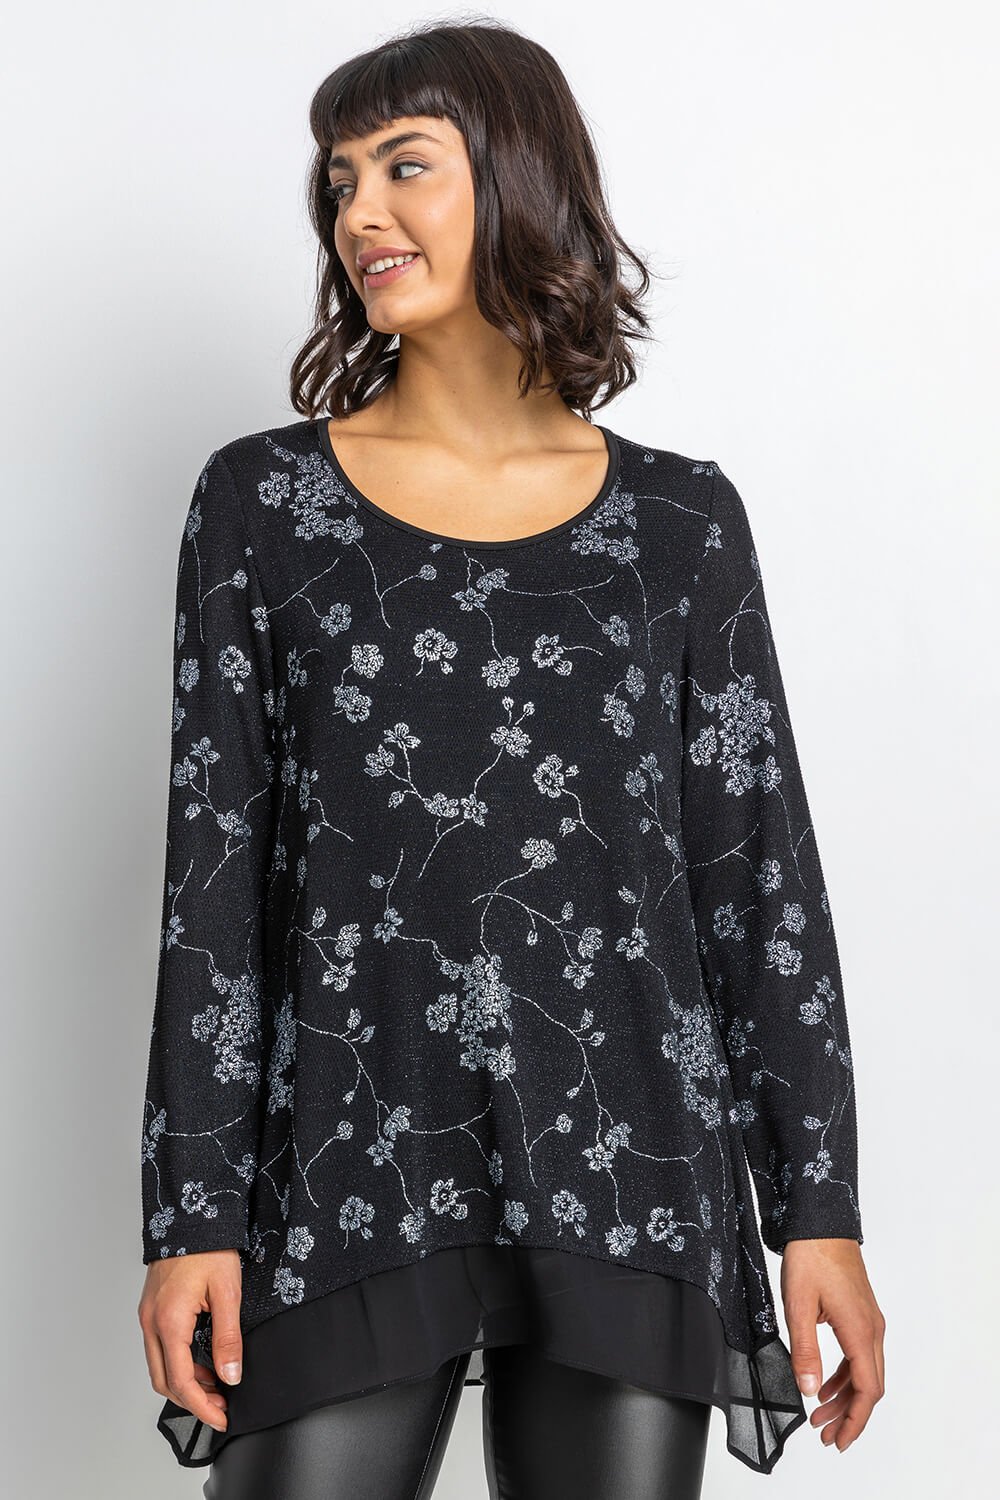 Silver Shimmer Floral Print Top, Image 5 of 5